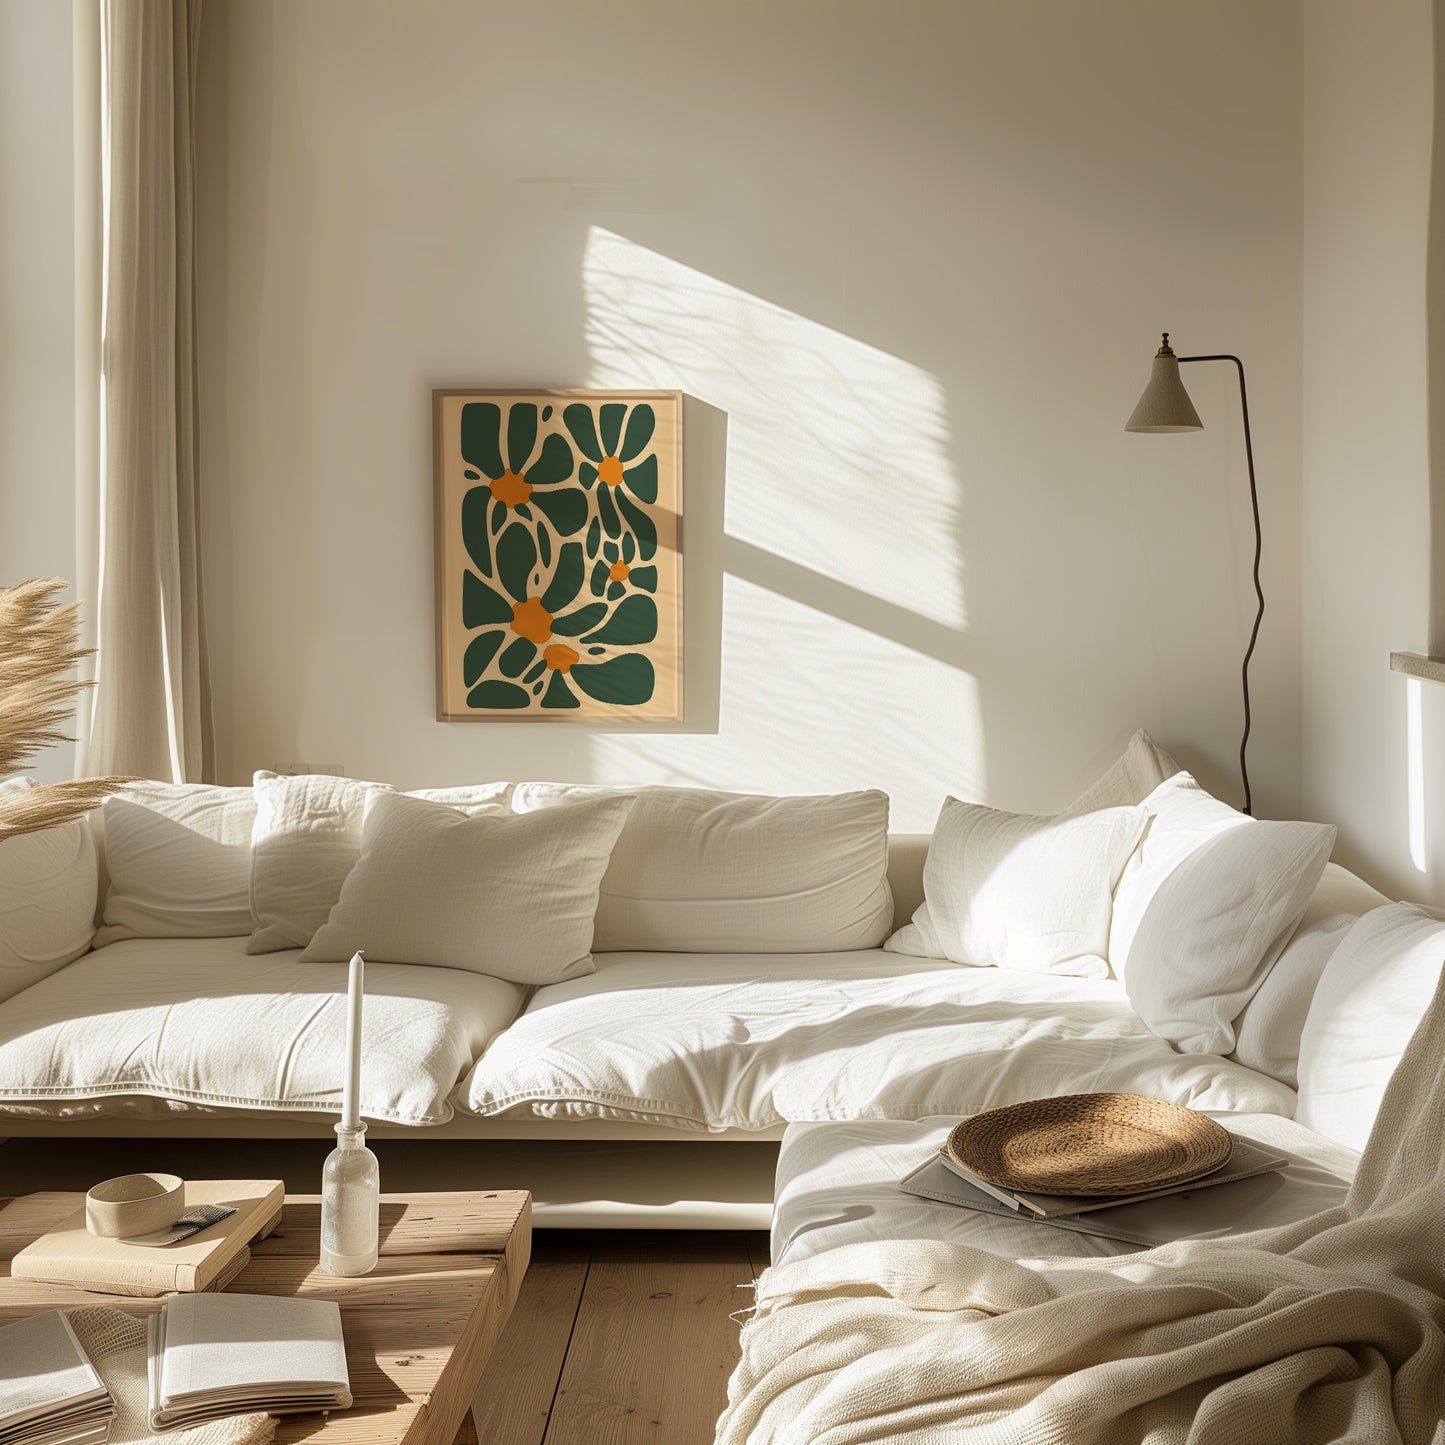 Cozy, sunlit living room with a white sofa, wall art, and a floor lamp.